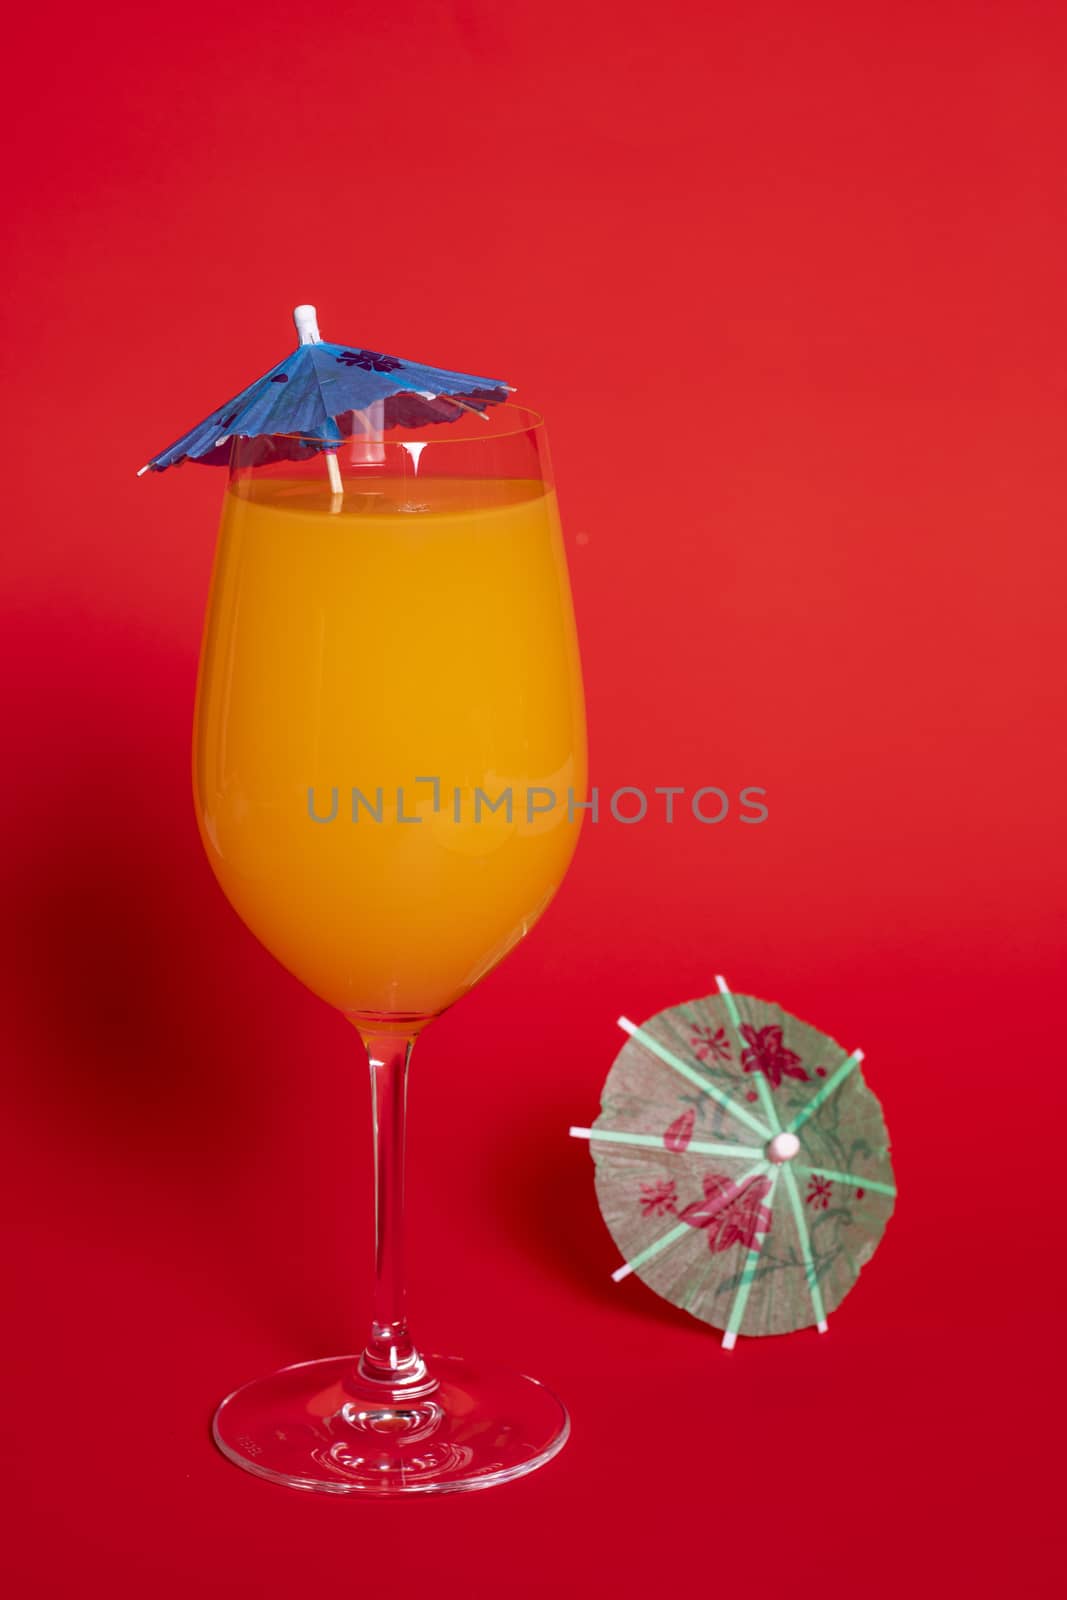 Orange drink with a blue umbrella in a wine glass set against a solid red background. A green umbrella lies beside the glass.